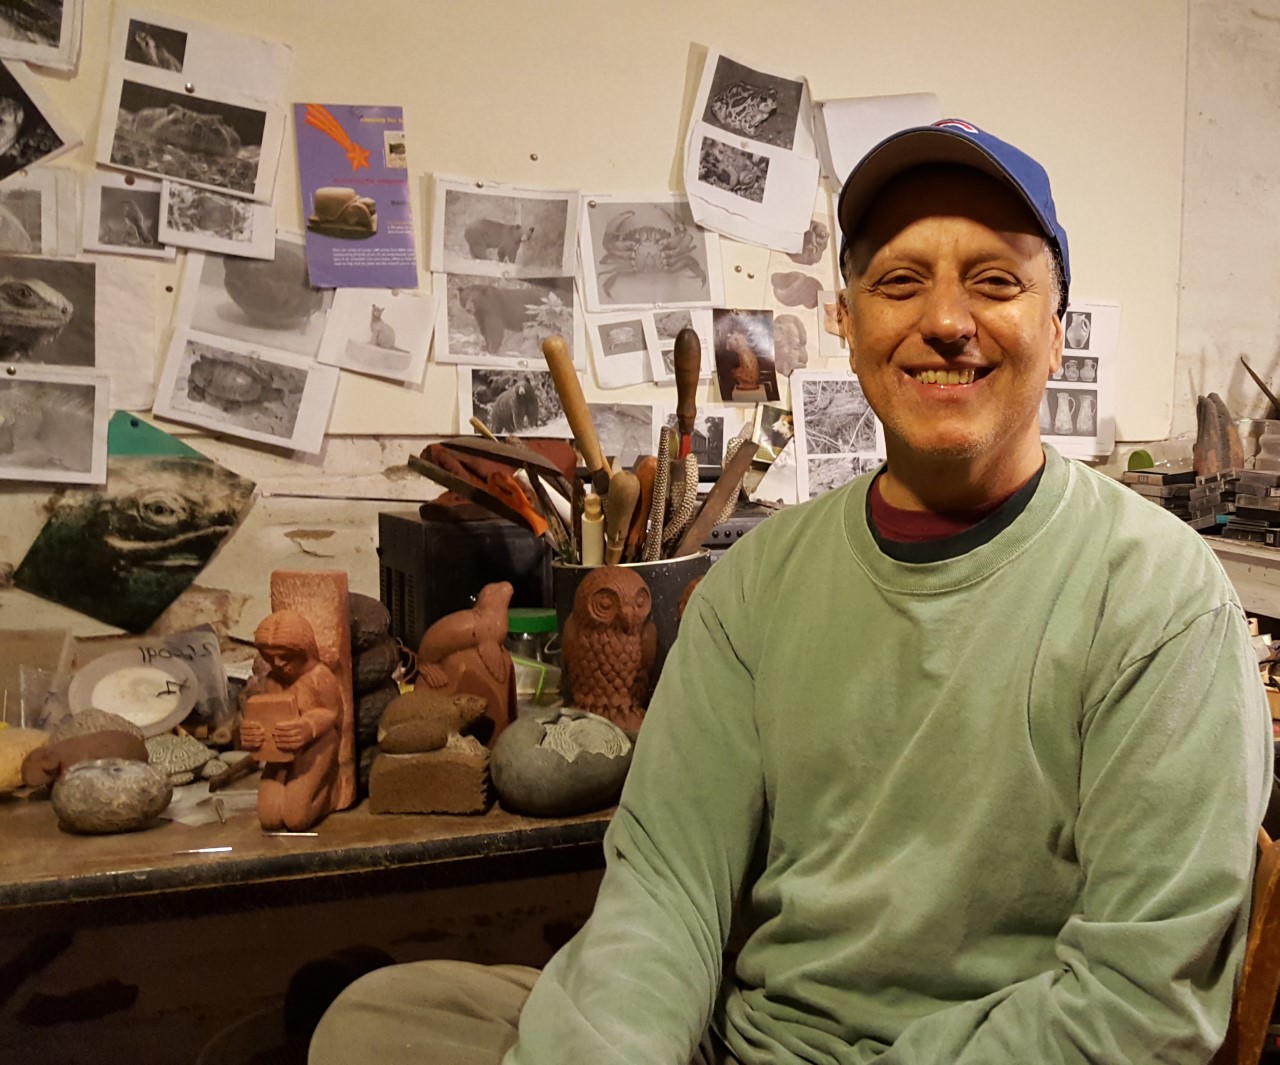 Image of Chris Berti, smiling, in front of multiple photographs and clay pieces strewn about in his colorful study. 